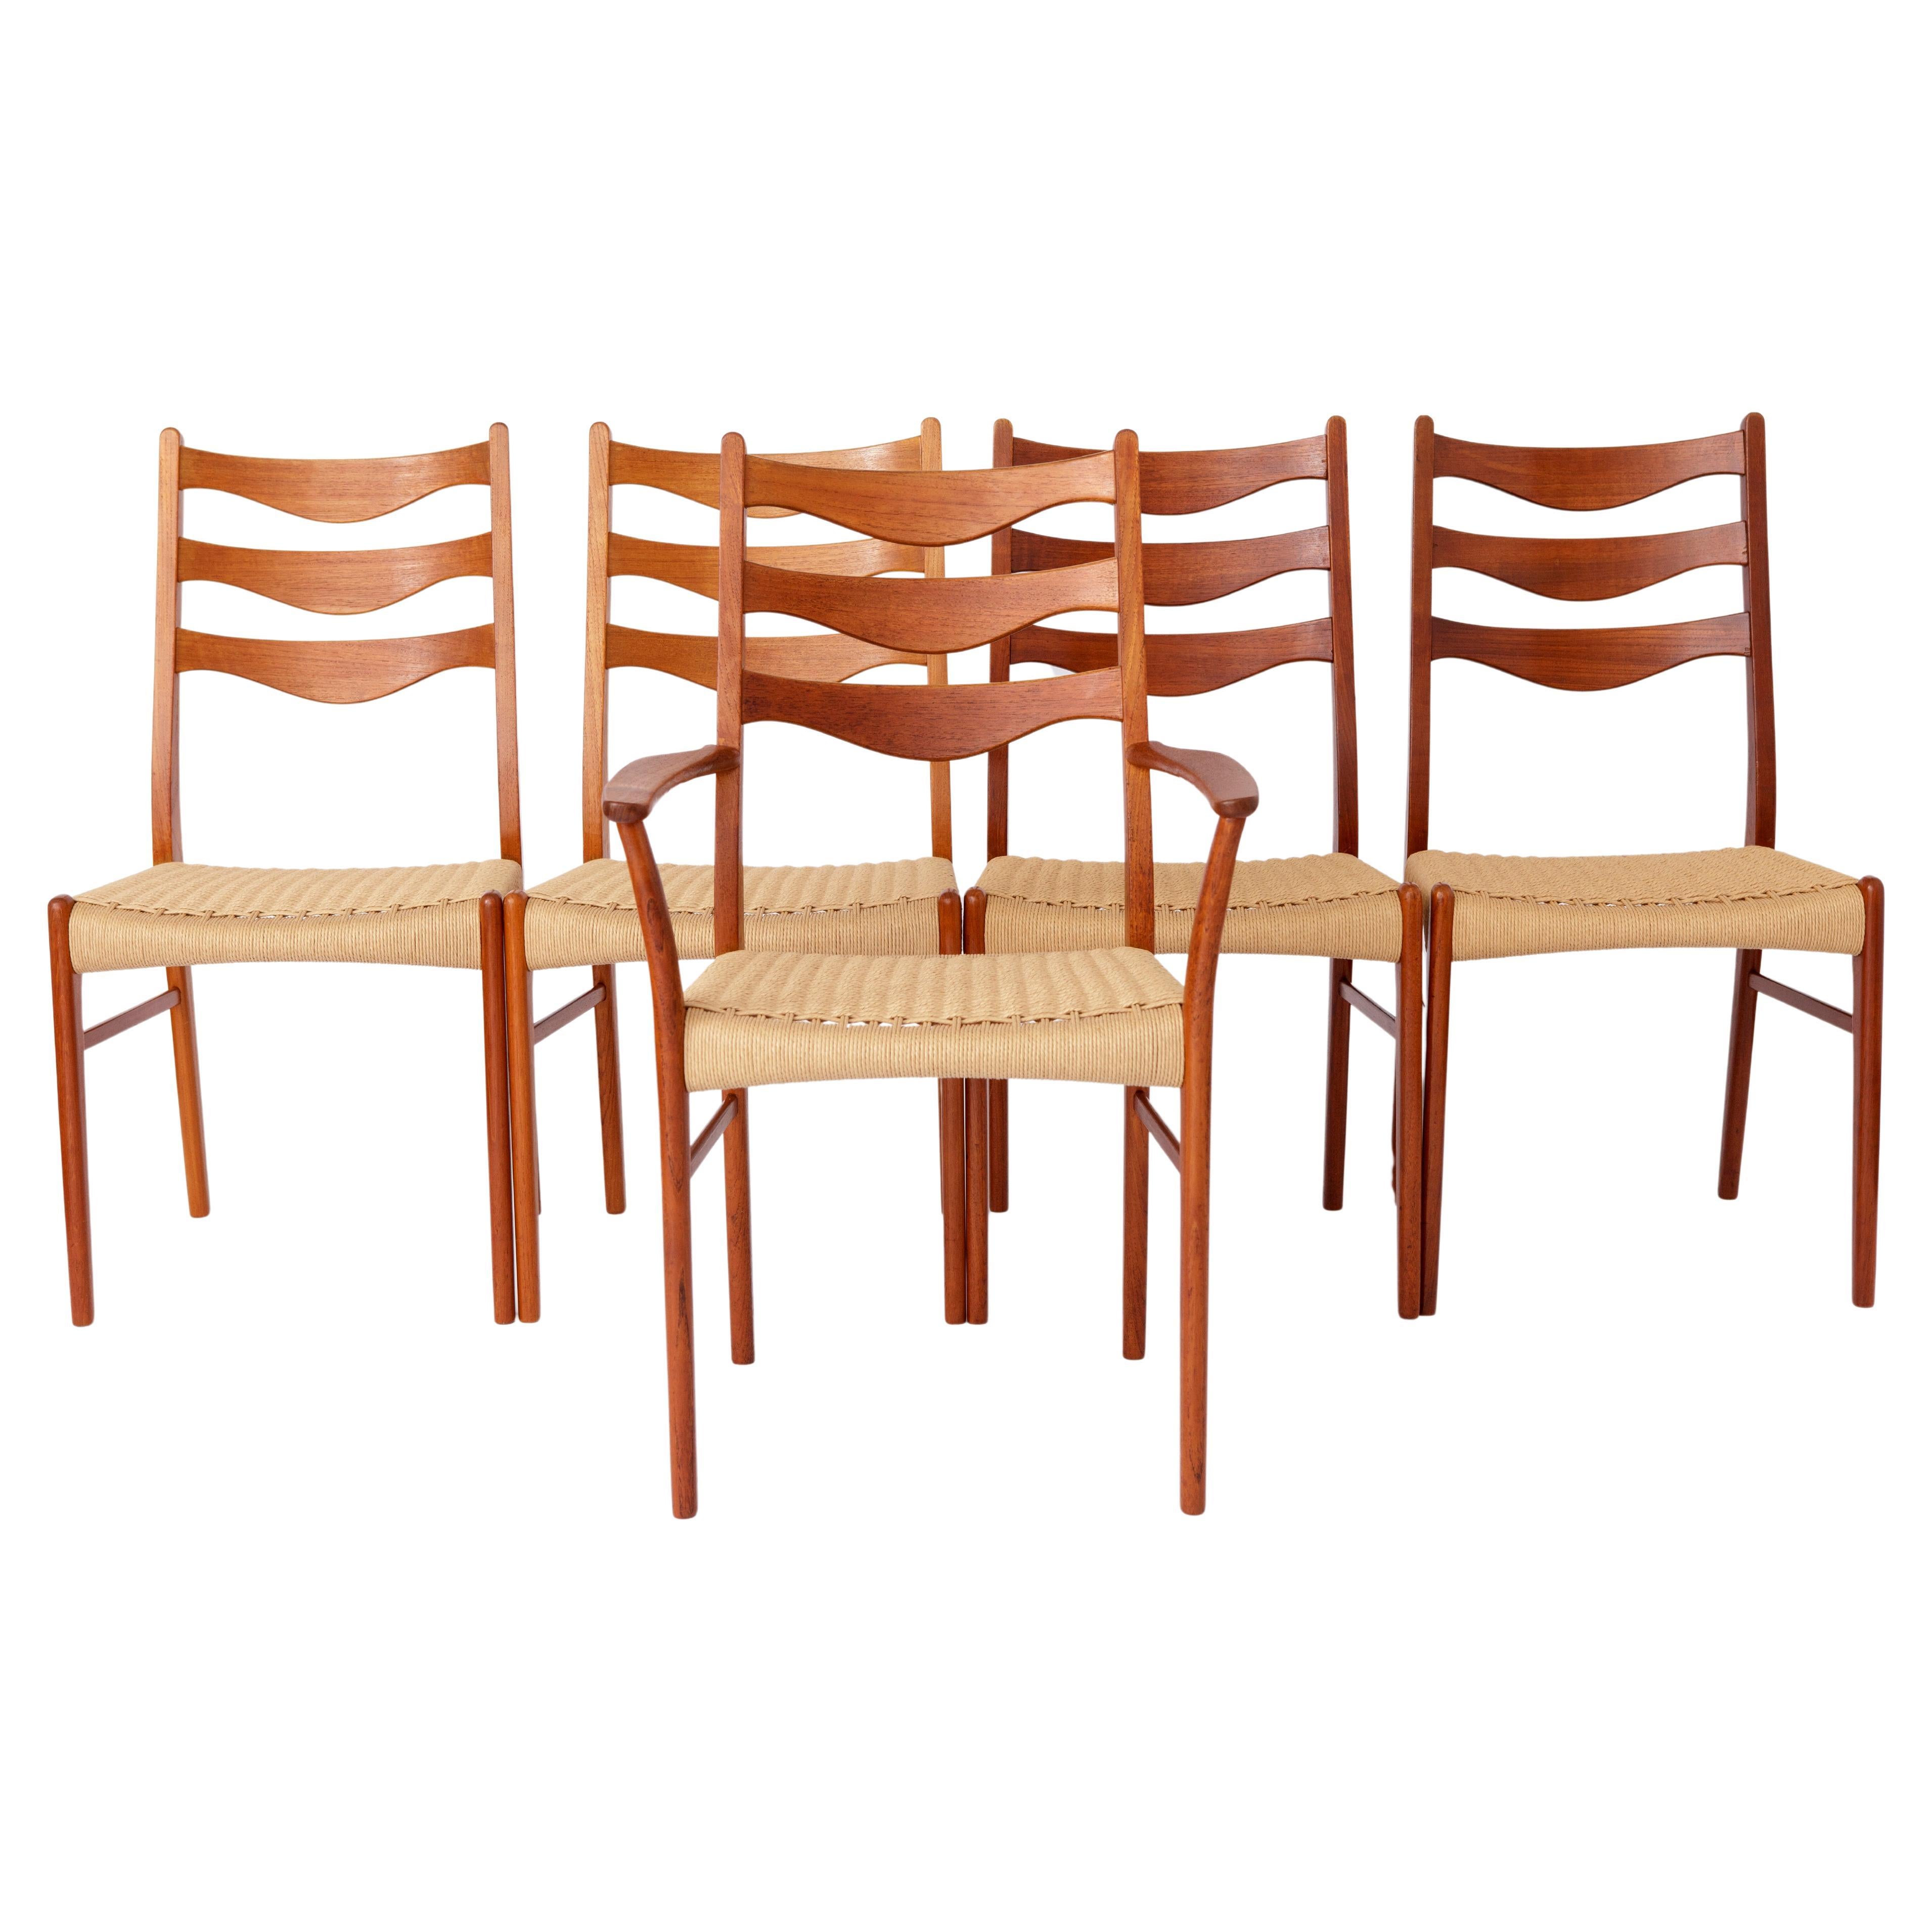 5 Arne Wahl Iversen Mid century teak dining chairs with papercord seat.